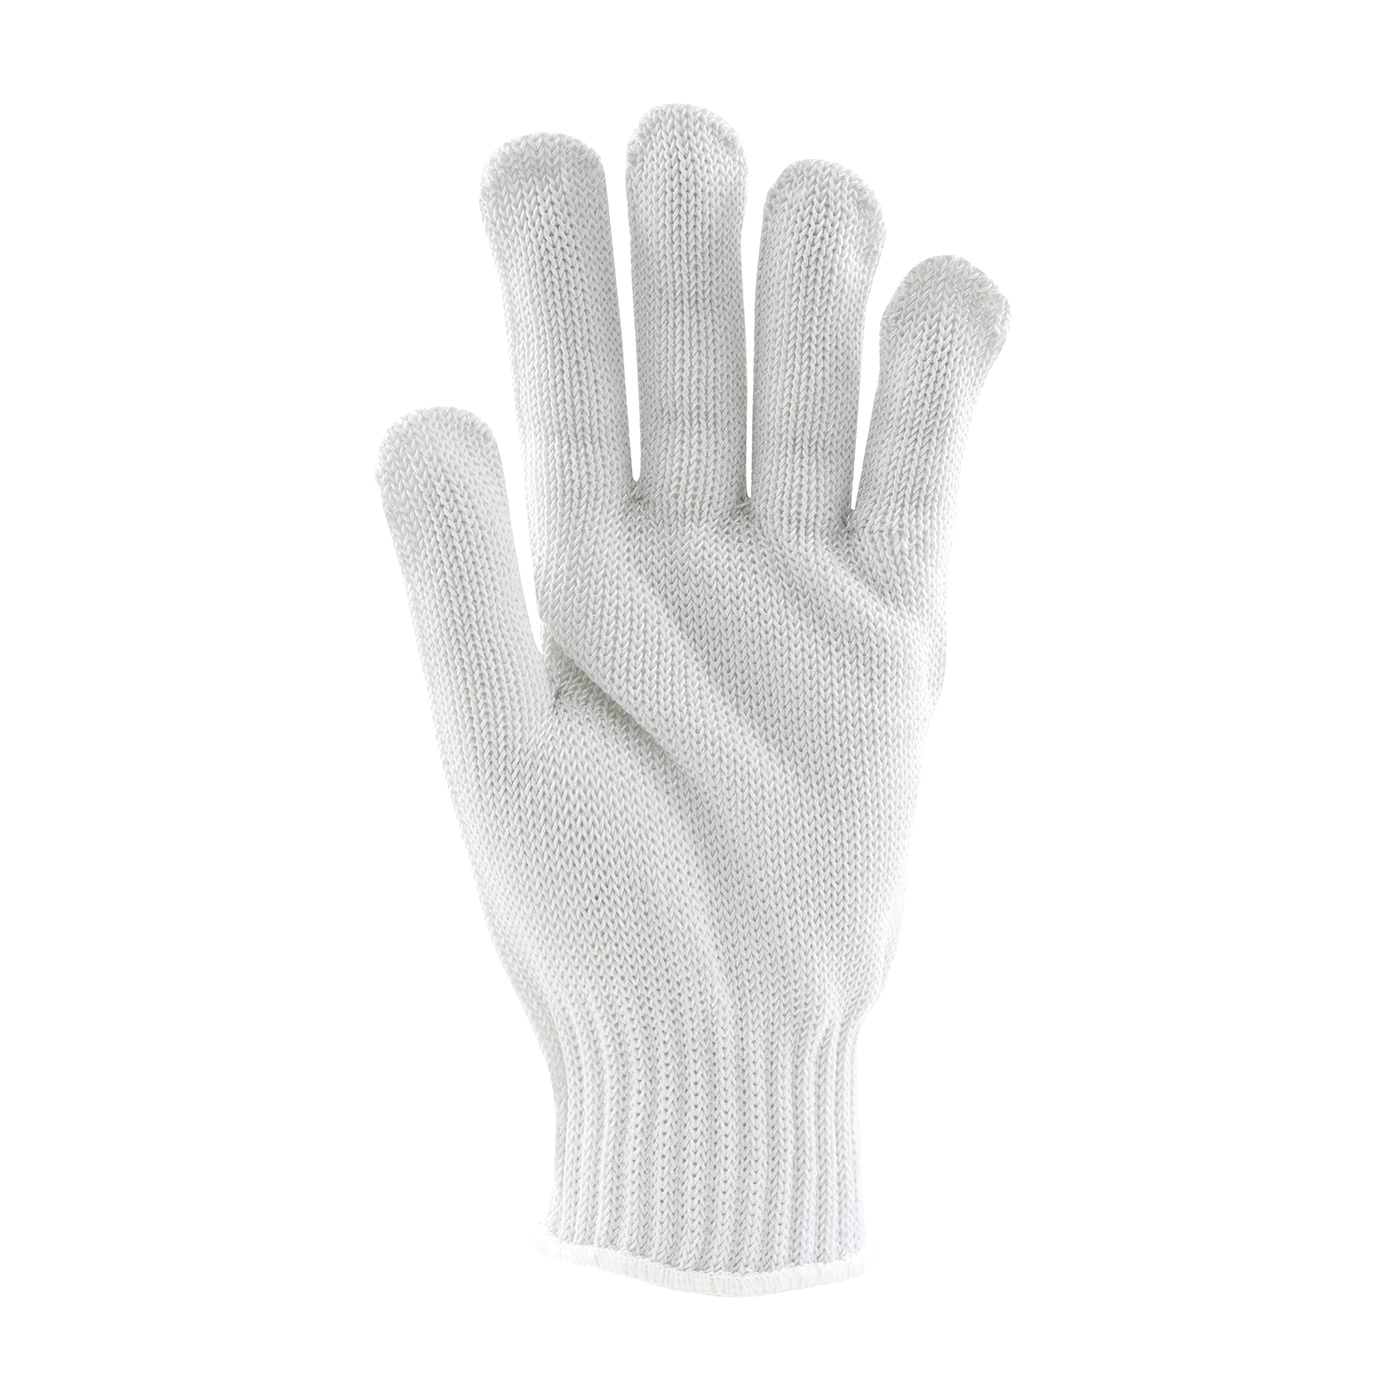 PIP® Kut-Gard® 22-780 Anti-Microbial Heavyweight Unisex Cut Resistant Gloves, Uncoated Coating, Dyneema®/Stainless Steel/Synthetic Fiber, Elastic Knit Wrist Cuff, Resists: Cut and Shrink, ANSI Cut-Resistance Level: A9, Paired Hand